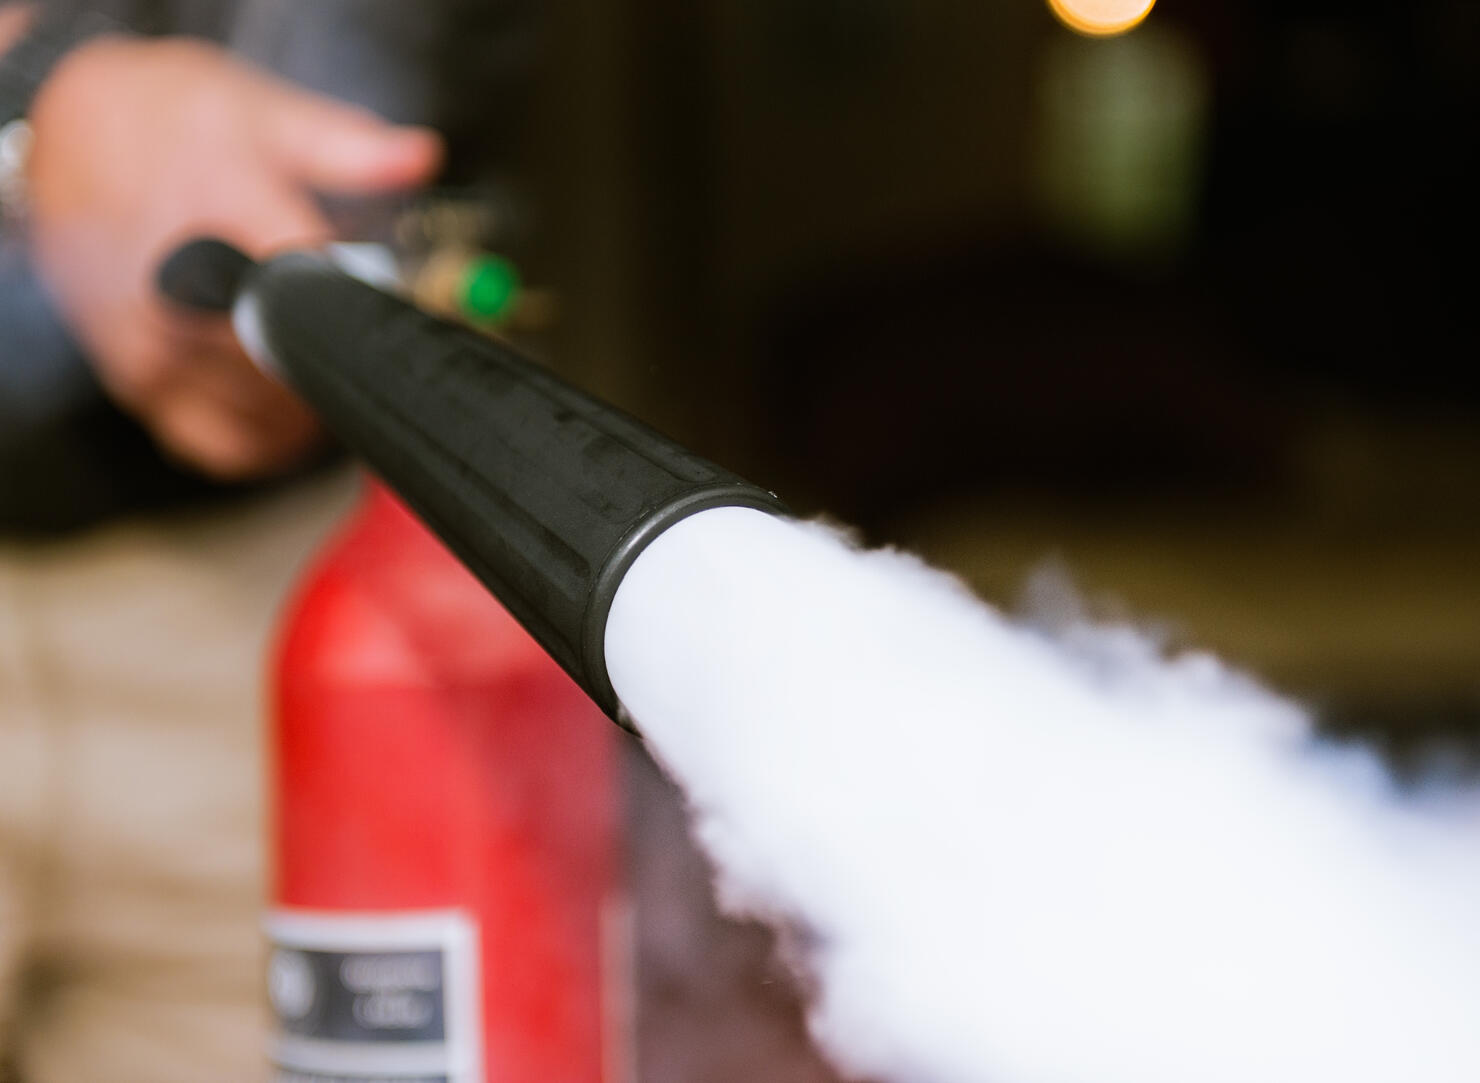 Fire extinguisher being used indoors